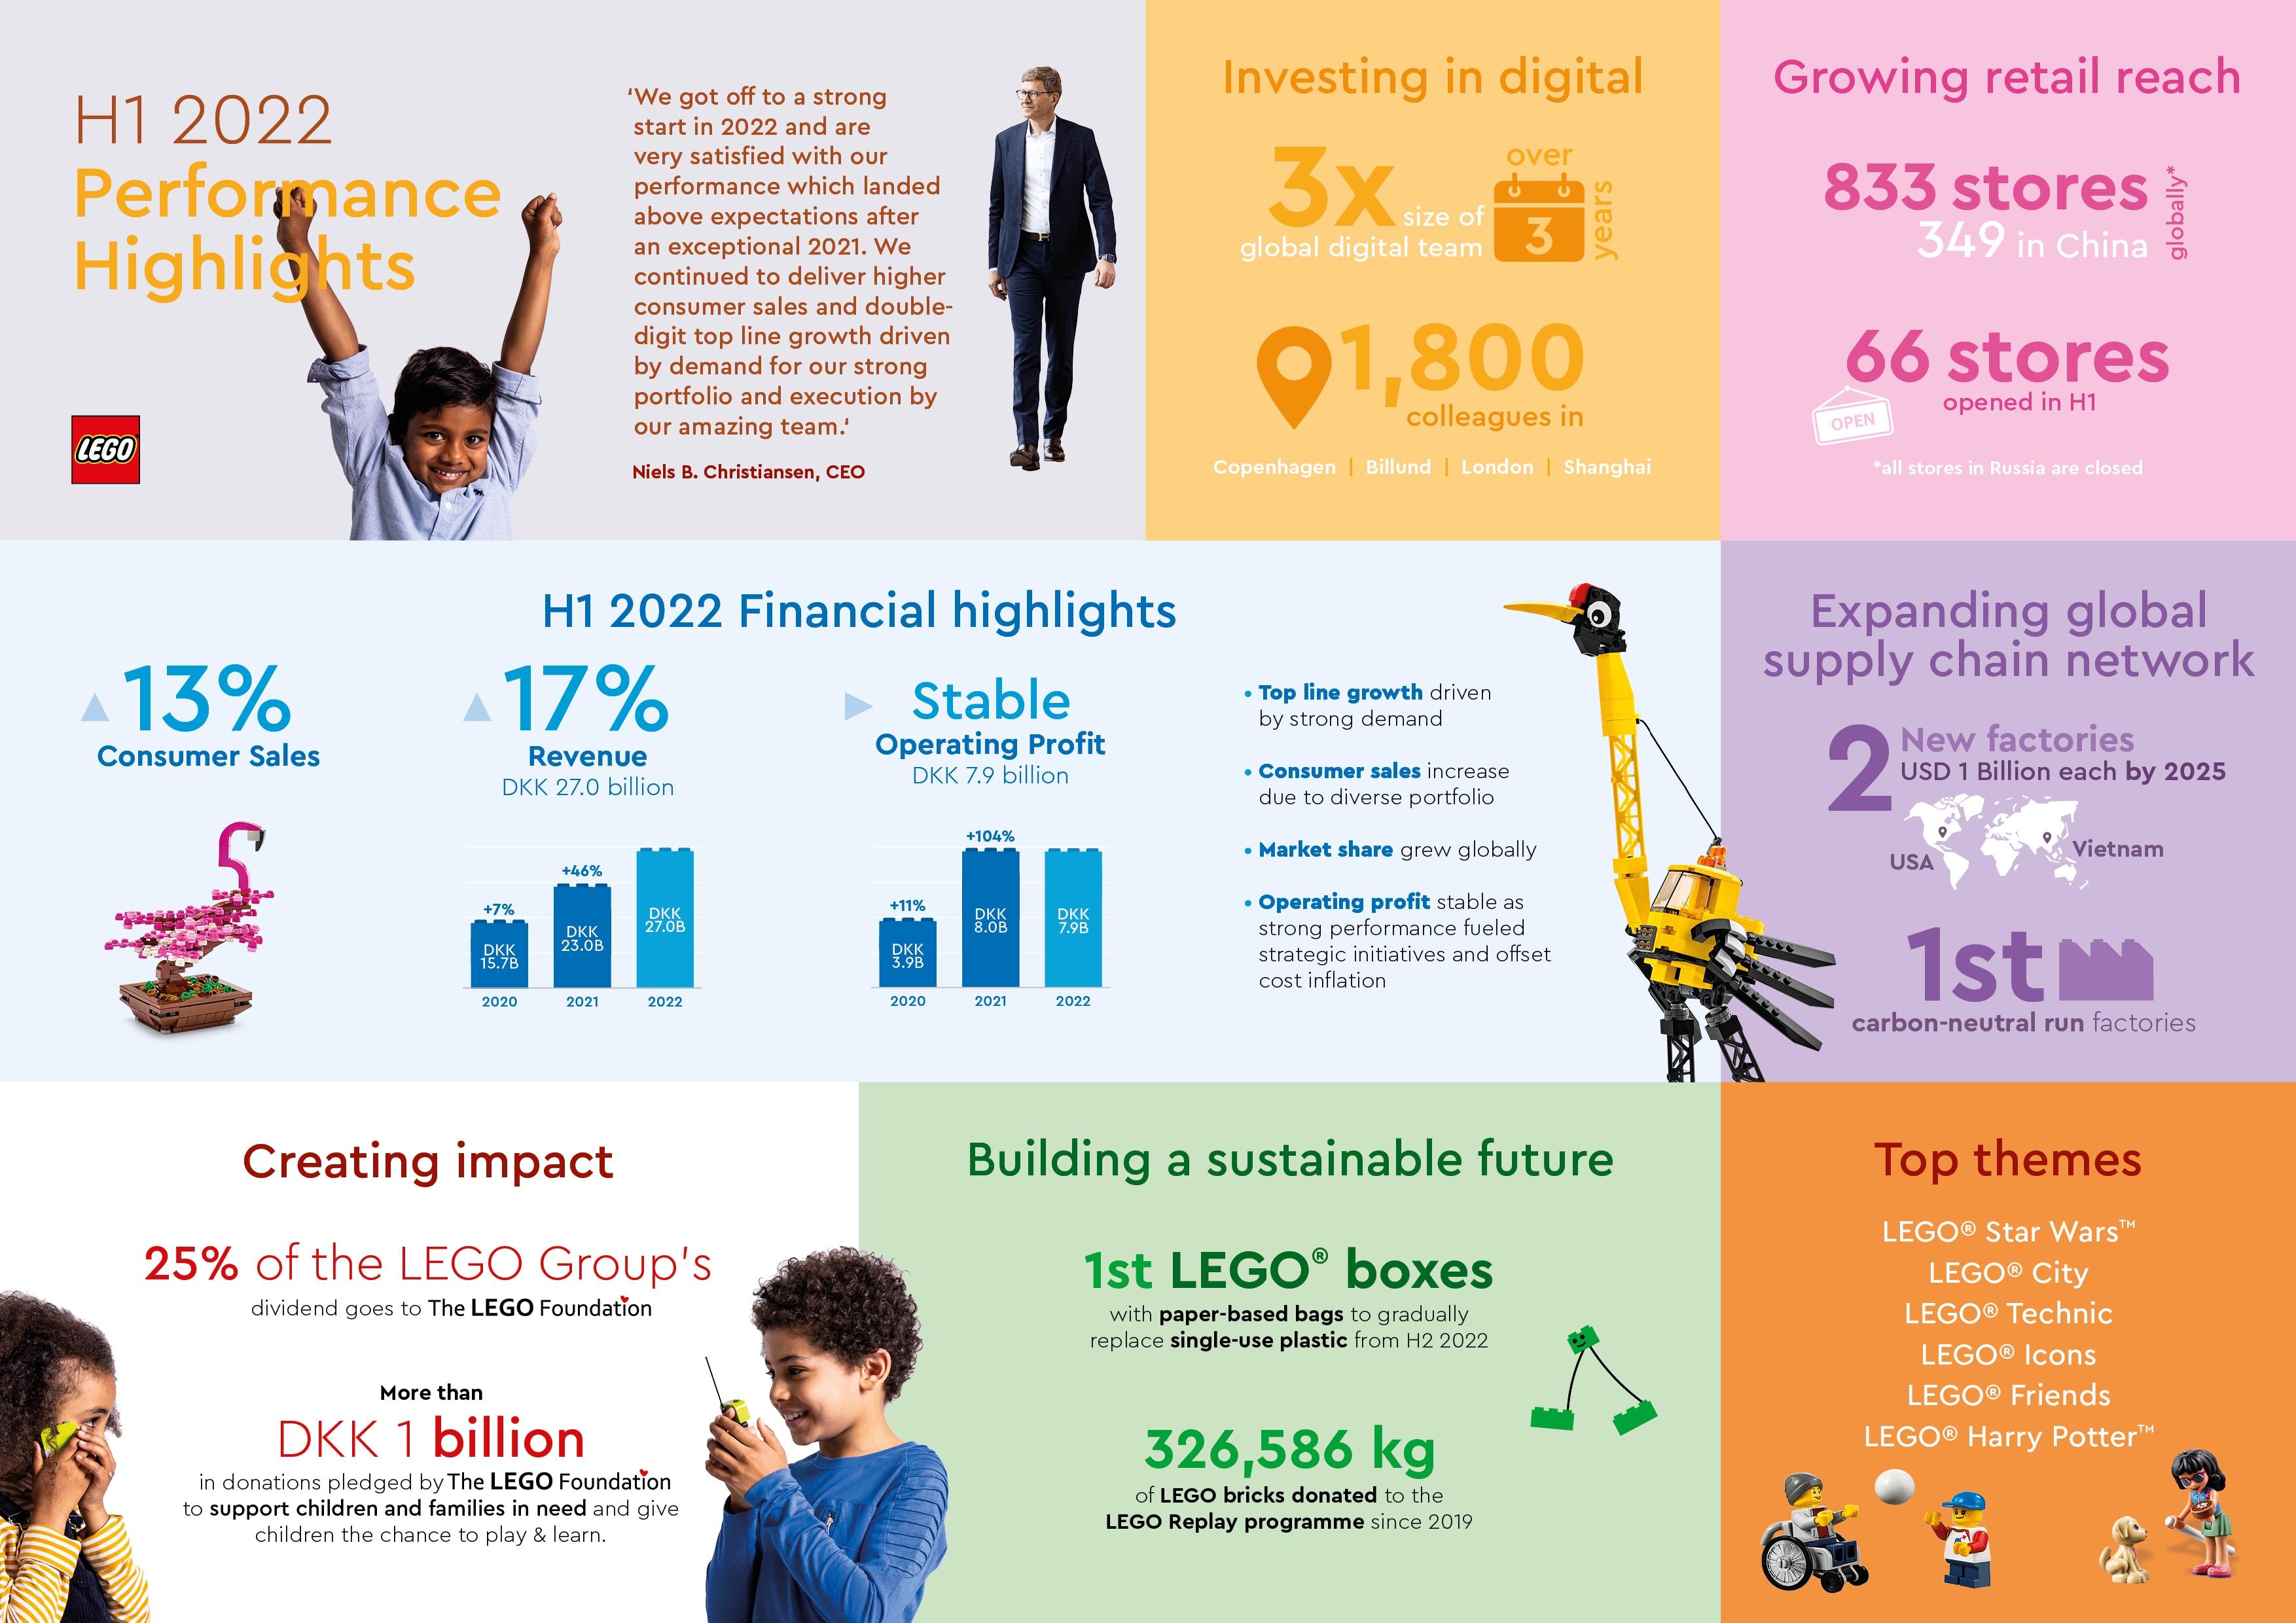 annual results - About Us - LEGO.com